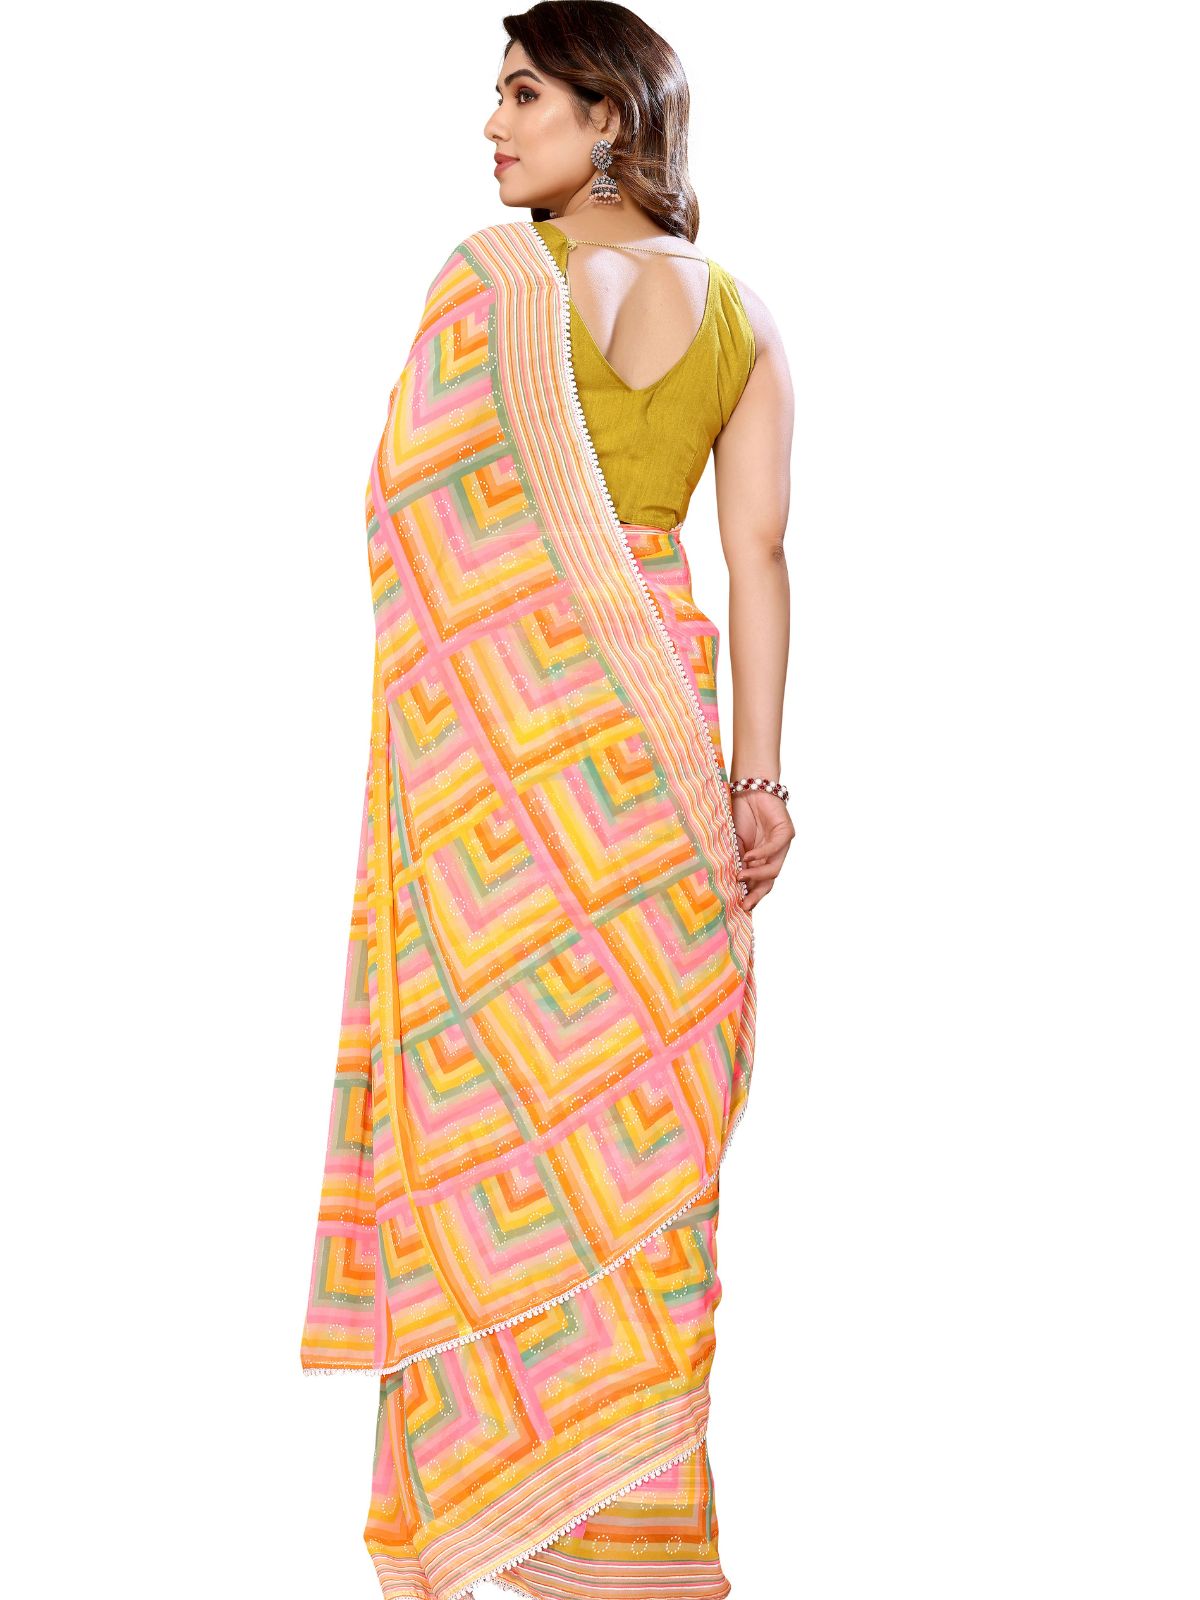 Odette Designer Yellow Printed Ready-to-Wear Saree with Unstitched Blouse for Women